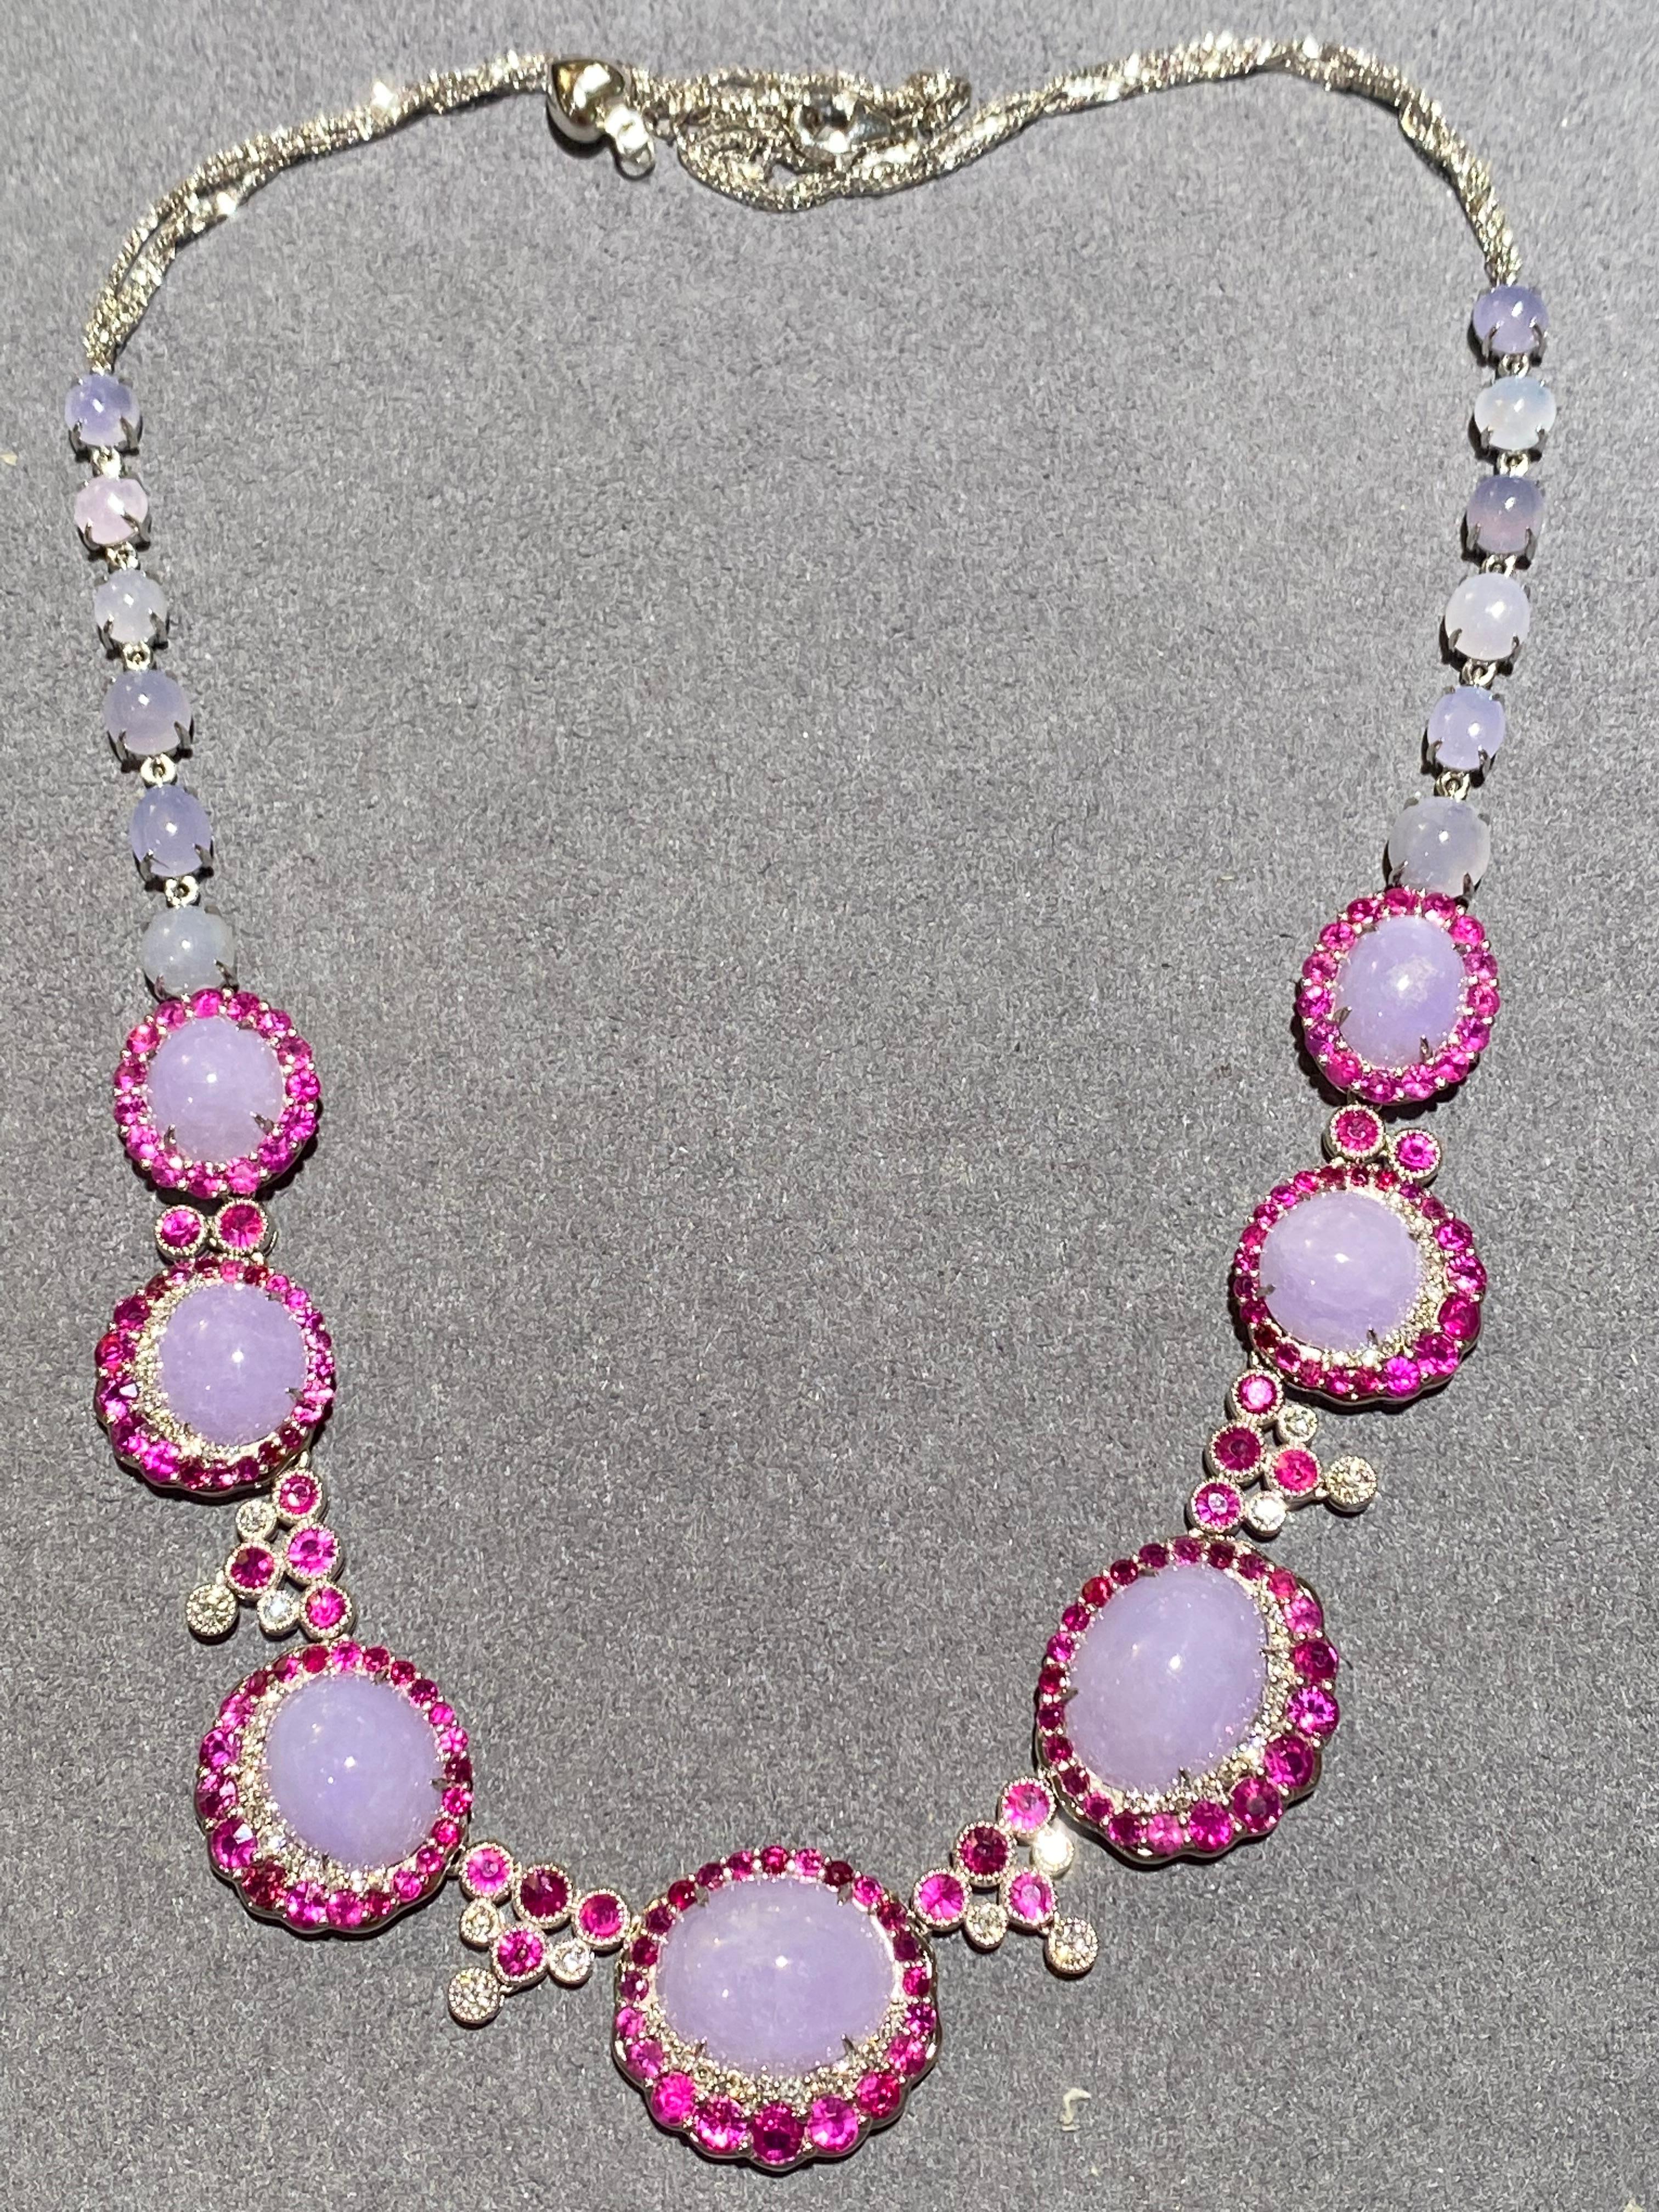 An outstanding type A lavender jadeite. ruby and diamond necklace in 18k white gold. The necklace is consists of multiple jadeite cabochons surrounded by diamonds and ruby clusters. The jadeite cluster is then separated from each other by triangle